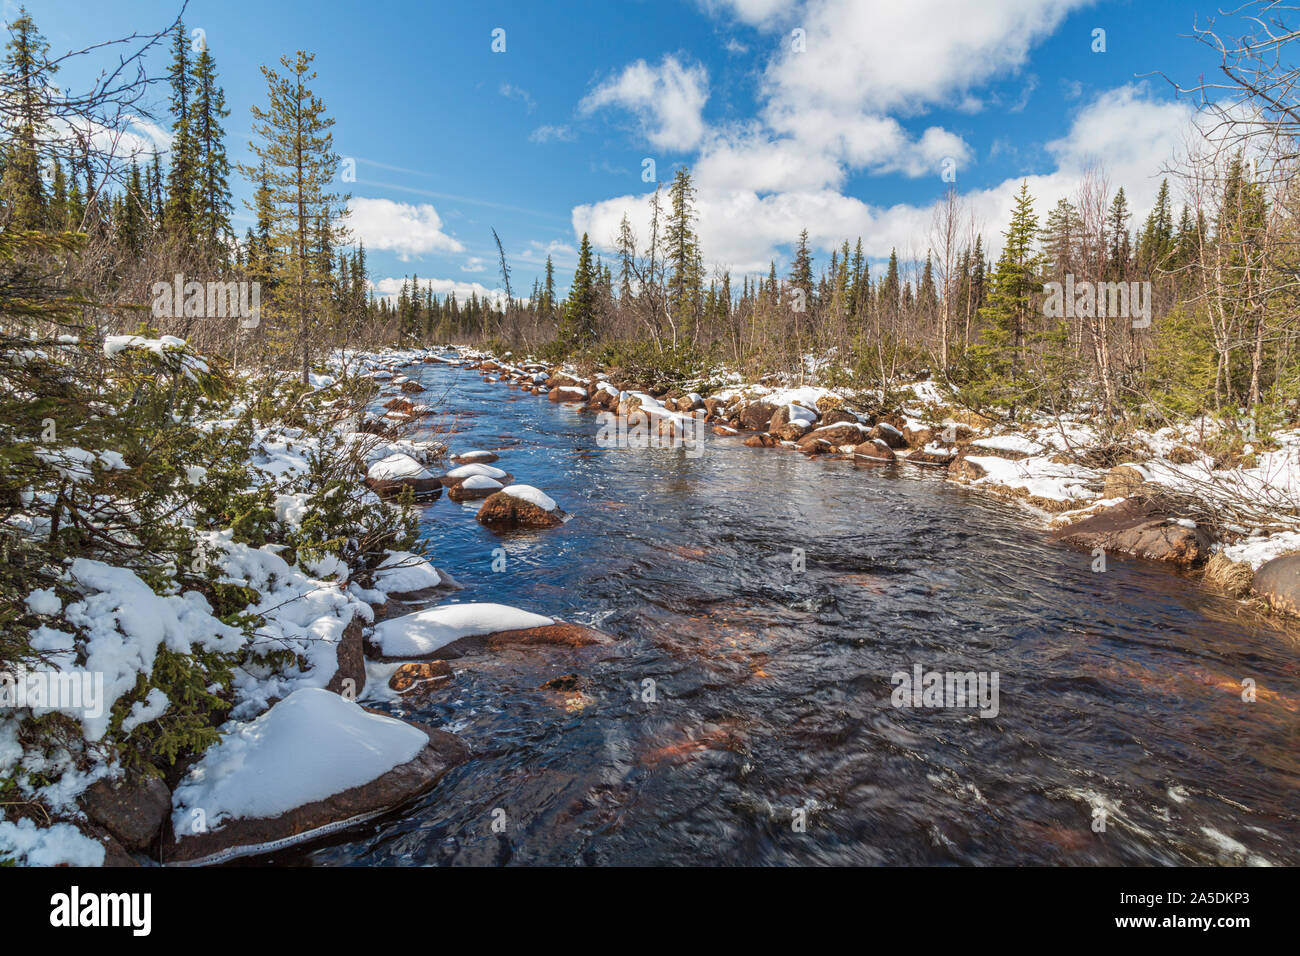 Muddus jokk in springtime with running water, snow on the side, spruce and birch trees around, Gällivare county, Swedish Lapland, Sweden Stock Photo